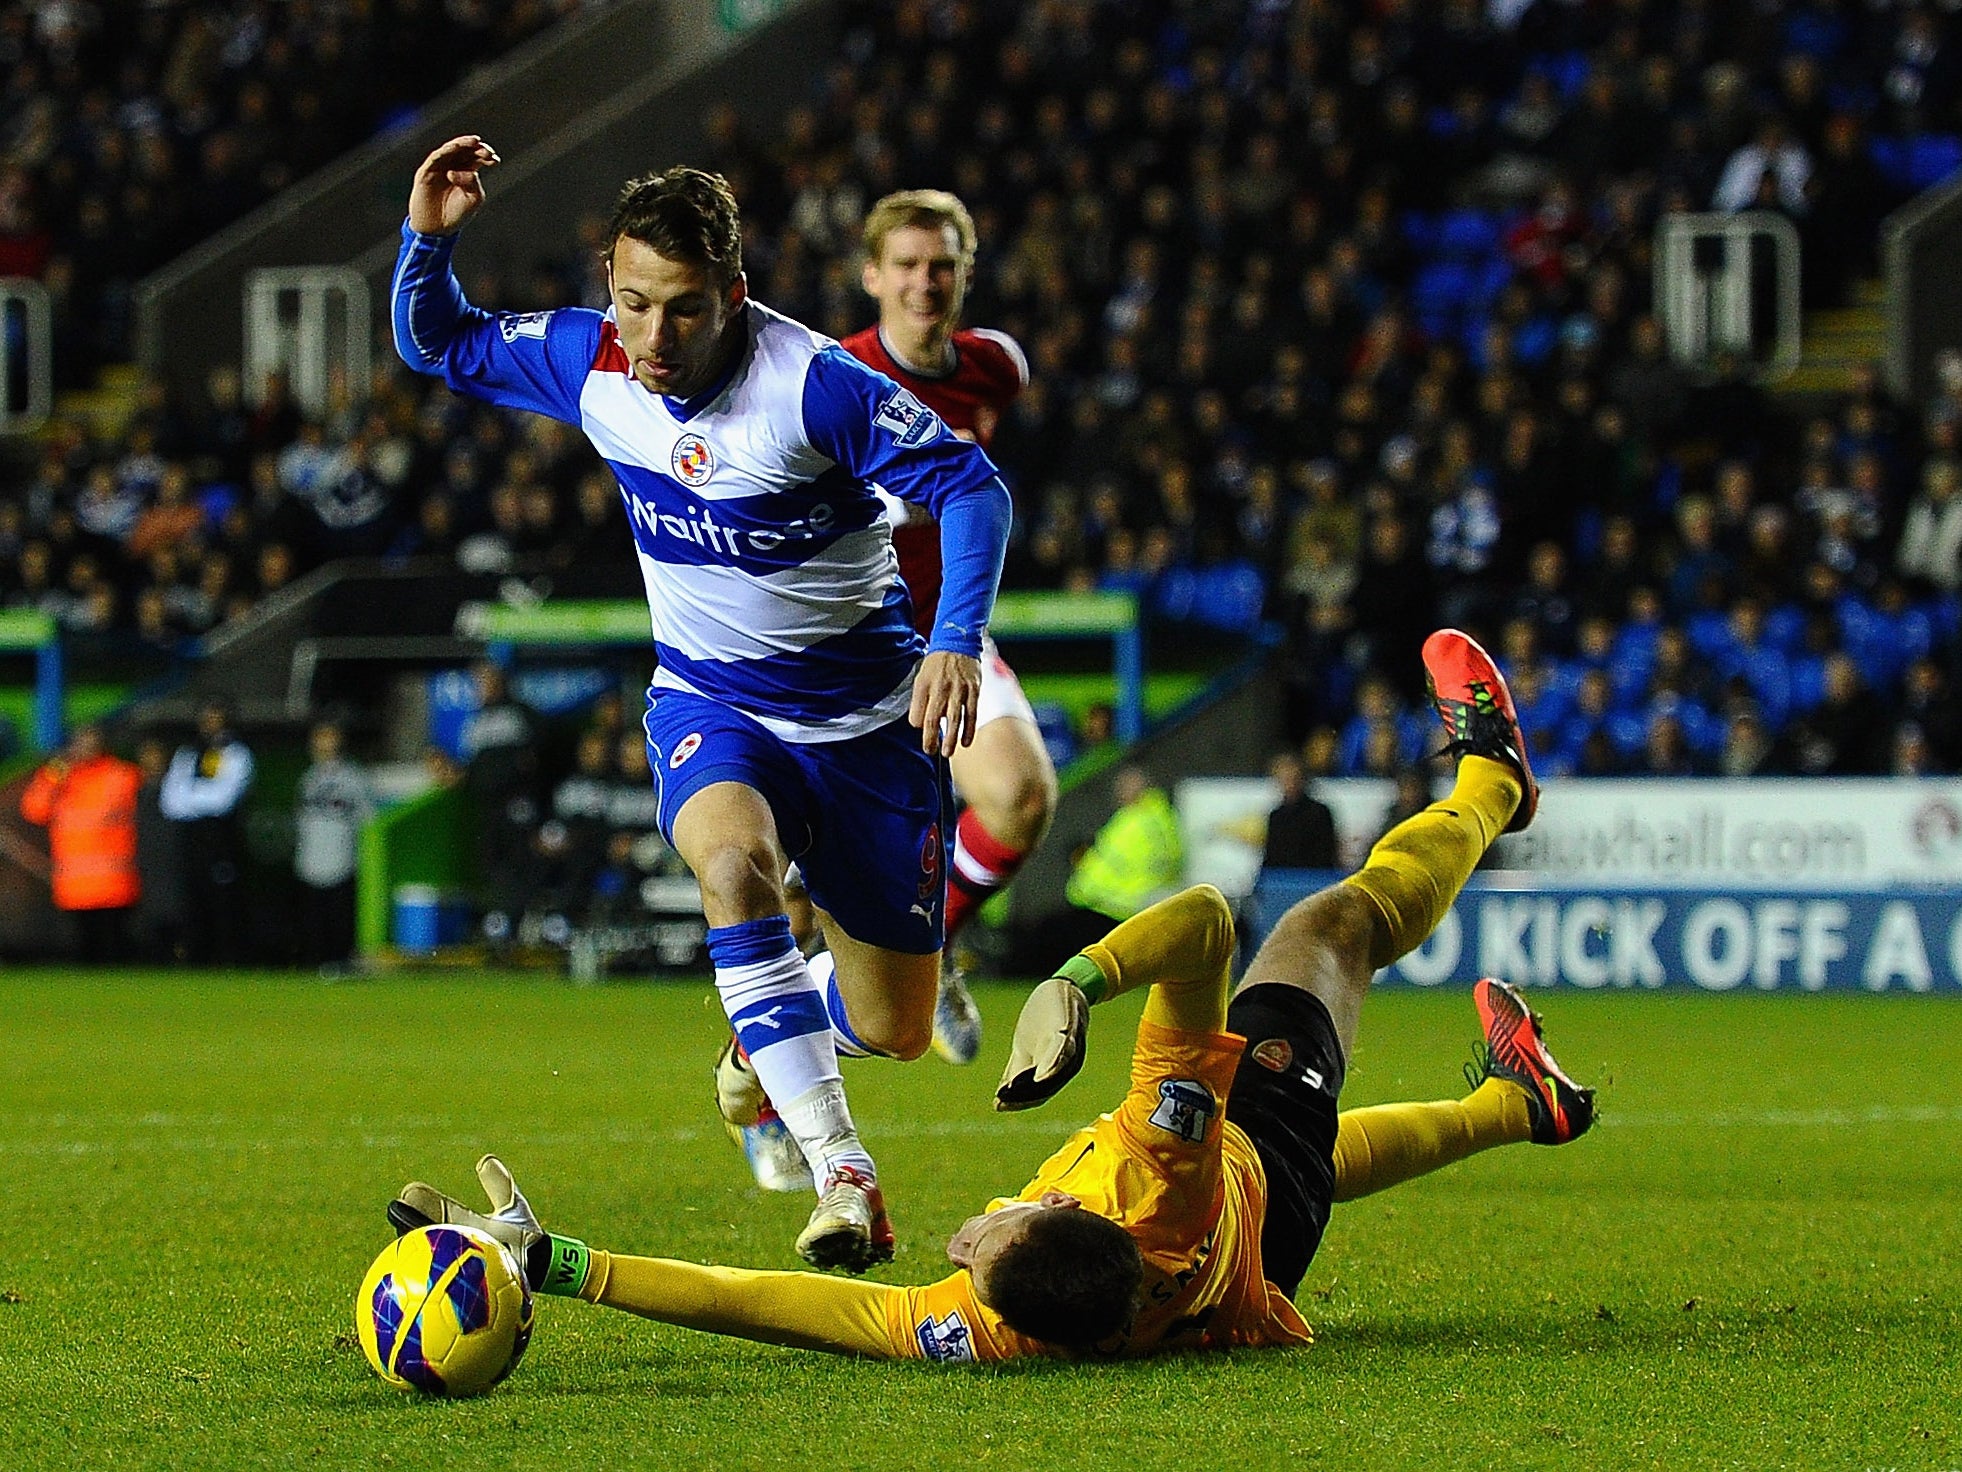 Reading were relegated from the Premier League in 2012